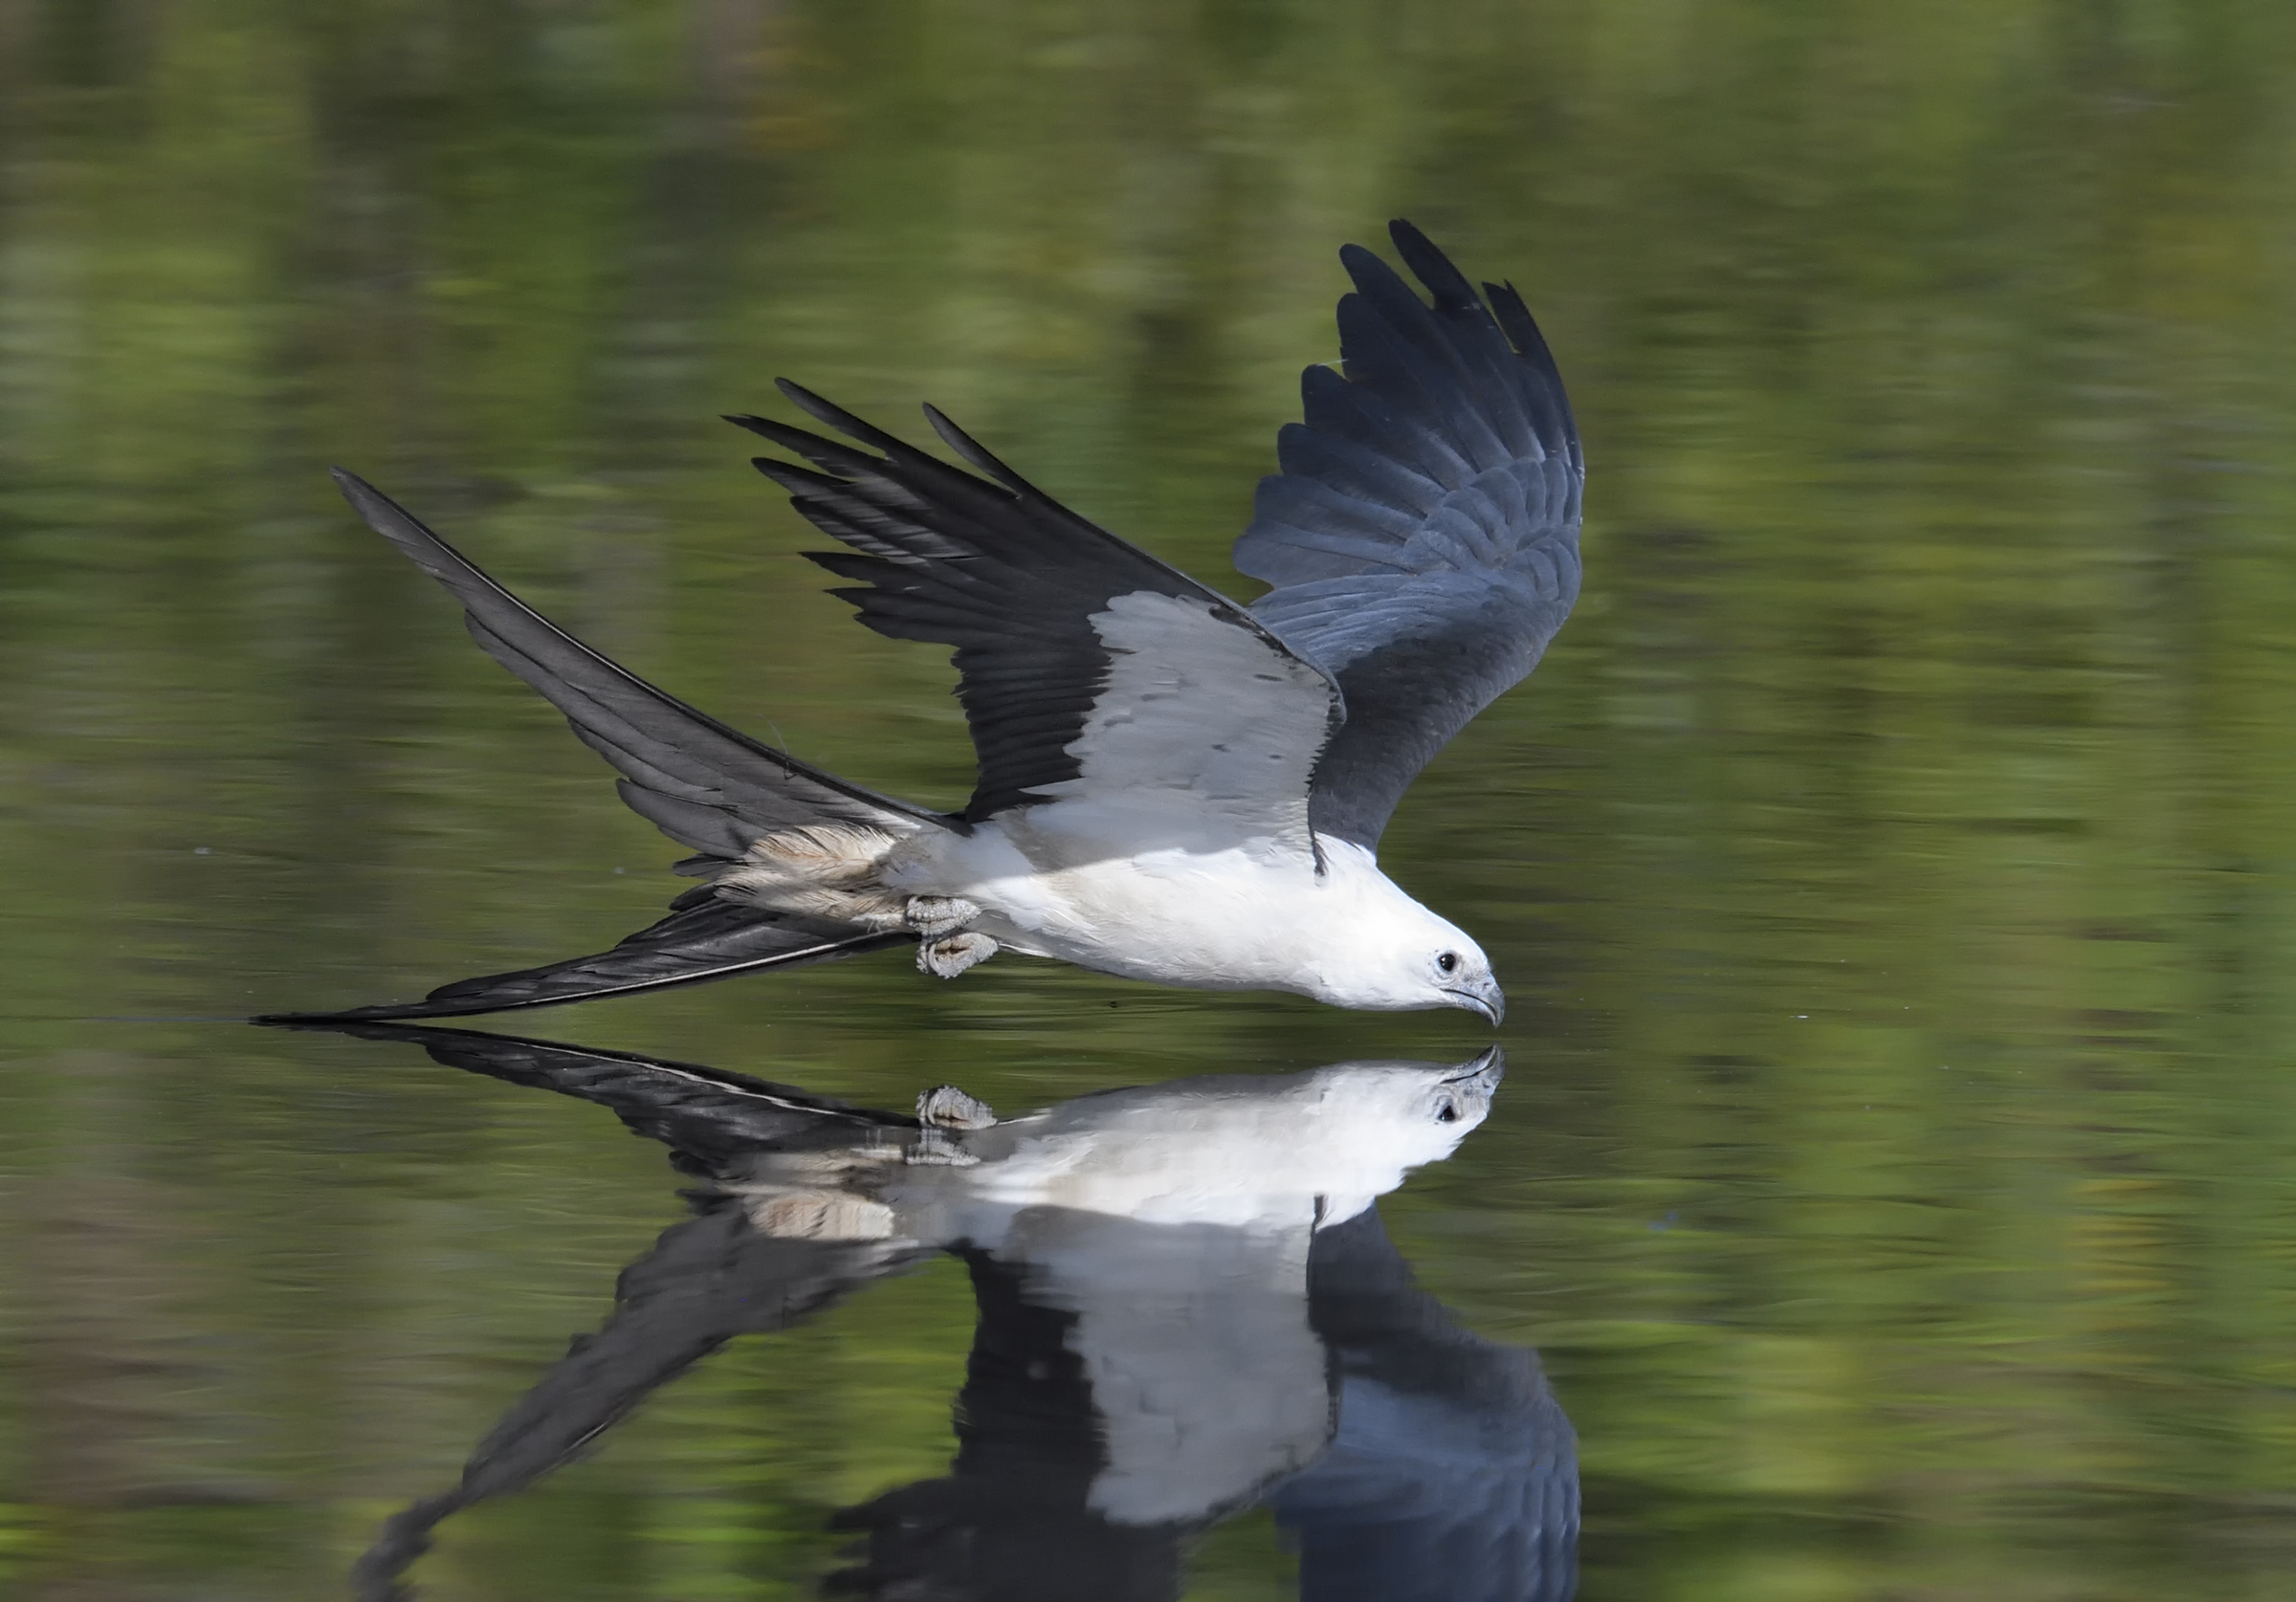 Swallow-tailed Kite skimming over calm water.